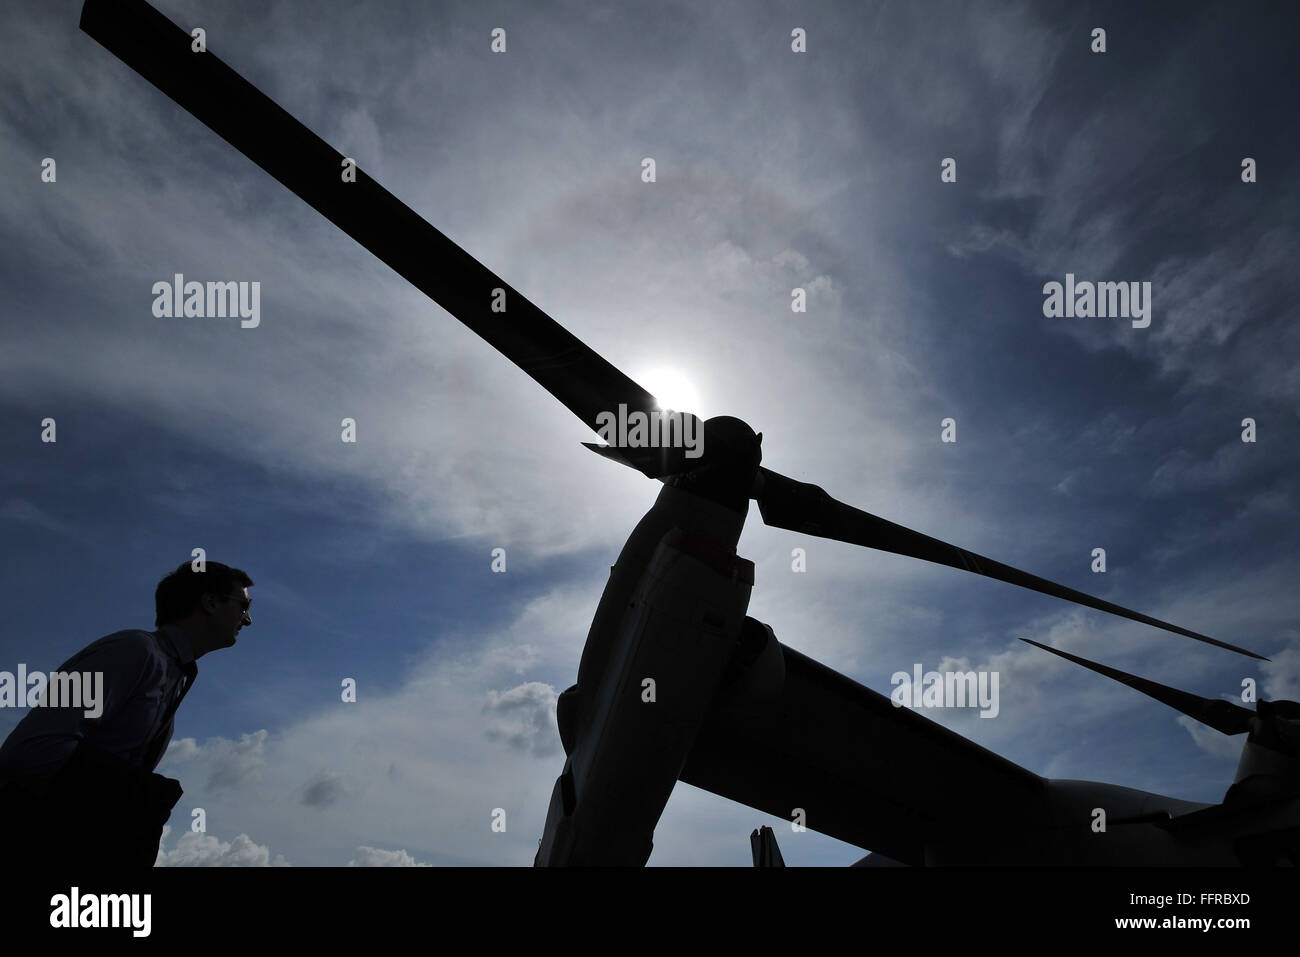 Singapore. 17th Feb, 2016. A visitor walks under one of the rotors of a V-22 Osprey tilt-rotor aircraft of the United States Air Force at the Singapore Airshow held at Singapore's Changi Exhibition Centre, Feb. 17, 2016. The Singapore Airshow, Asia's largest and one of the most important aerospace and defence exhibitions in the world, kicked off Tuesday with a renewed focus on driving global aviation industry trends and developments. Credit:  Then Chih Wey/Xinhua/Alamy Live News Stock Photo